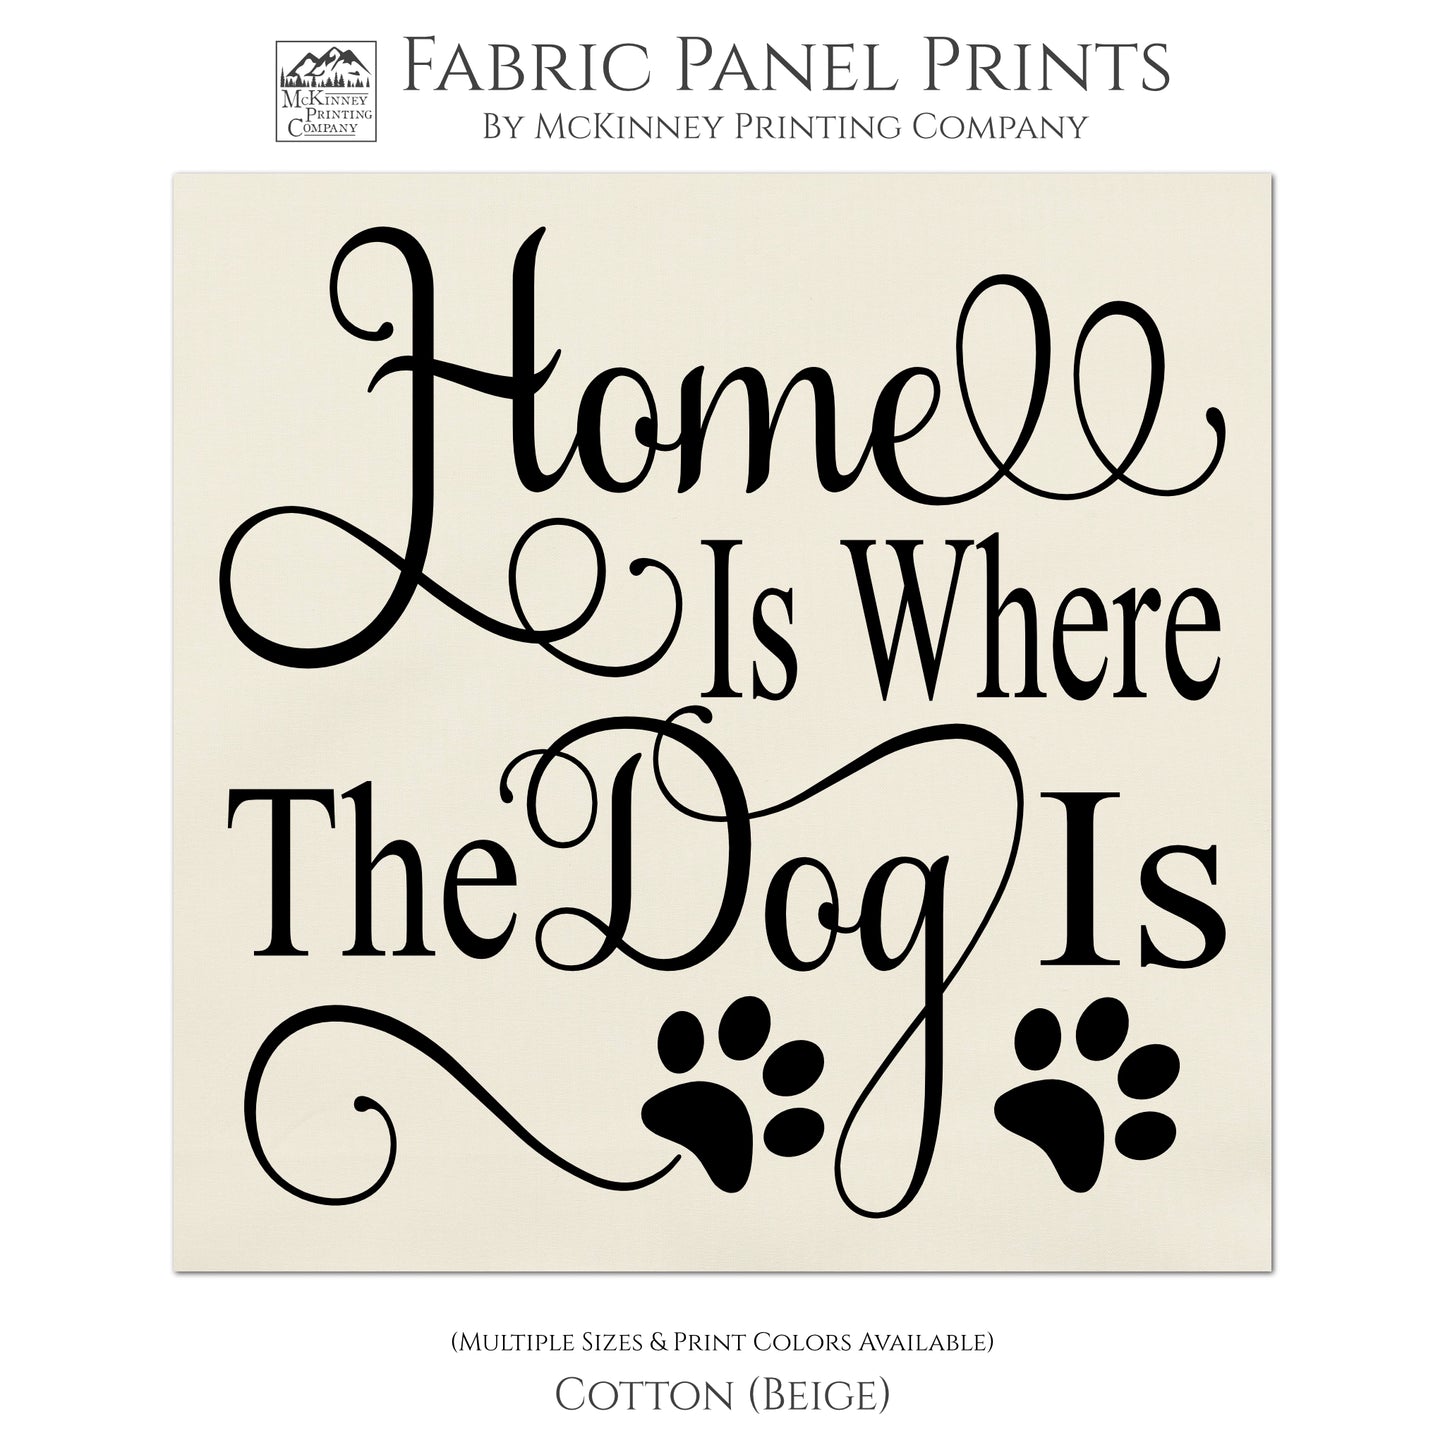 Dog Print Fabric, Saying, Quote, Home is where the dog is, Quilting, Quilt Fabric Panel Block - Cotton